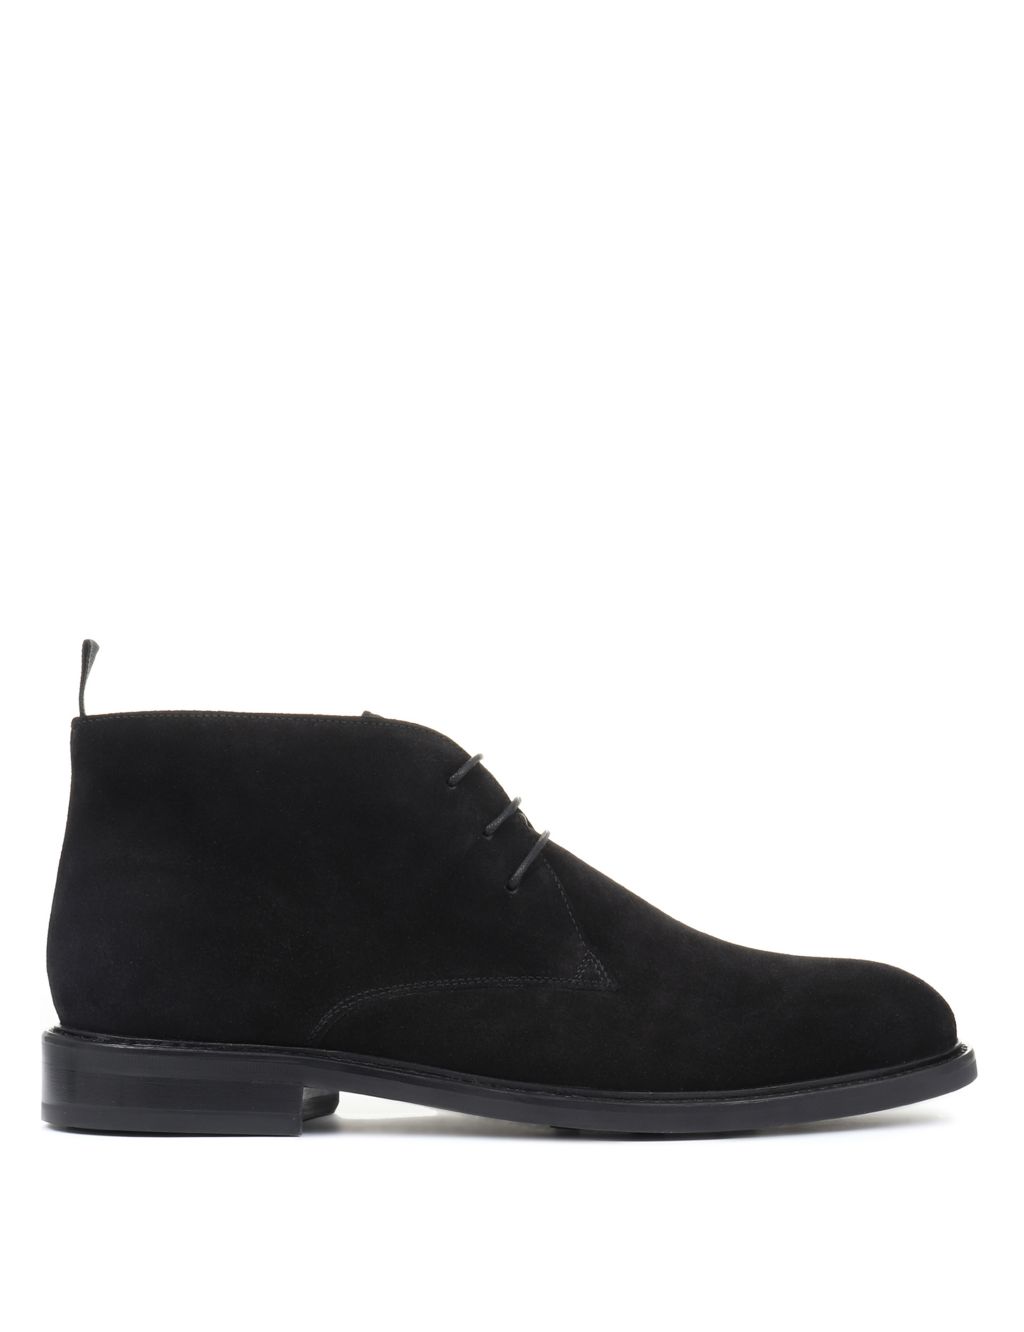 Suede Pull-on Chukka Boots image 5